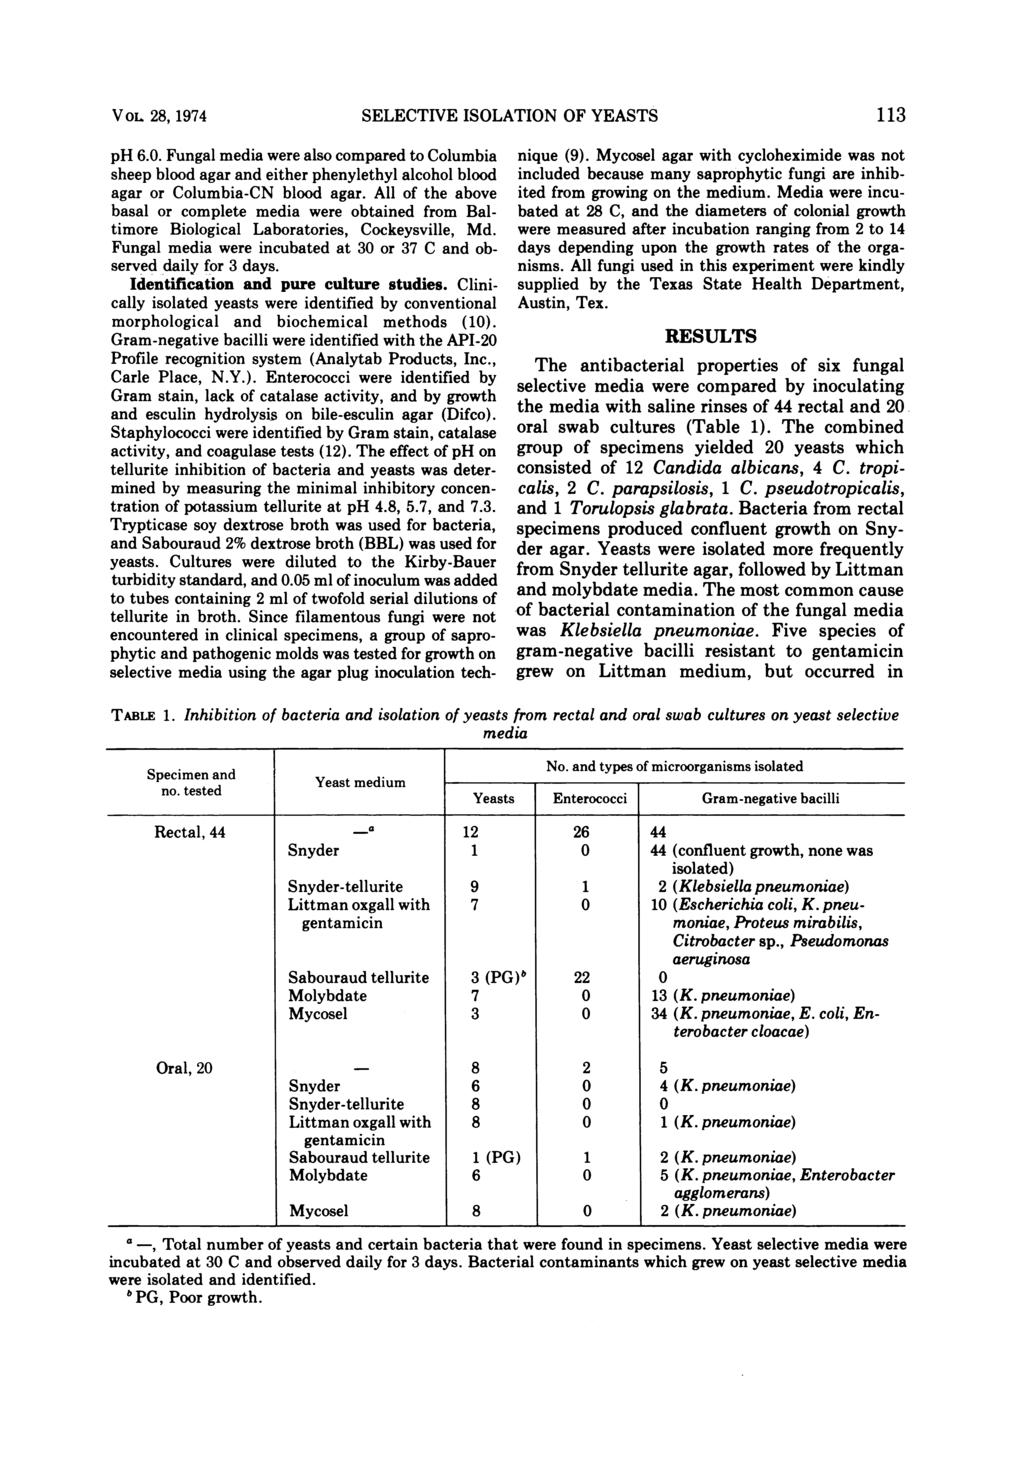 VOL 28, 1974 TABLE 1. SELECTIVE ISOLATION OF YEASTS ph 6.0. Fungal media were also compared to Columbia sheep blood agar and either phenylethyl alcohol blood agar or Columbia-CN blood agar.